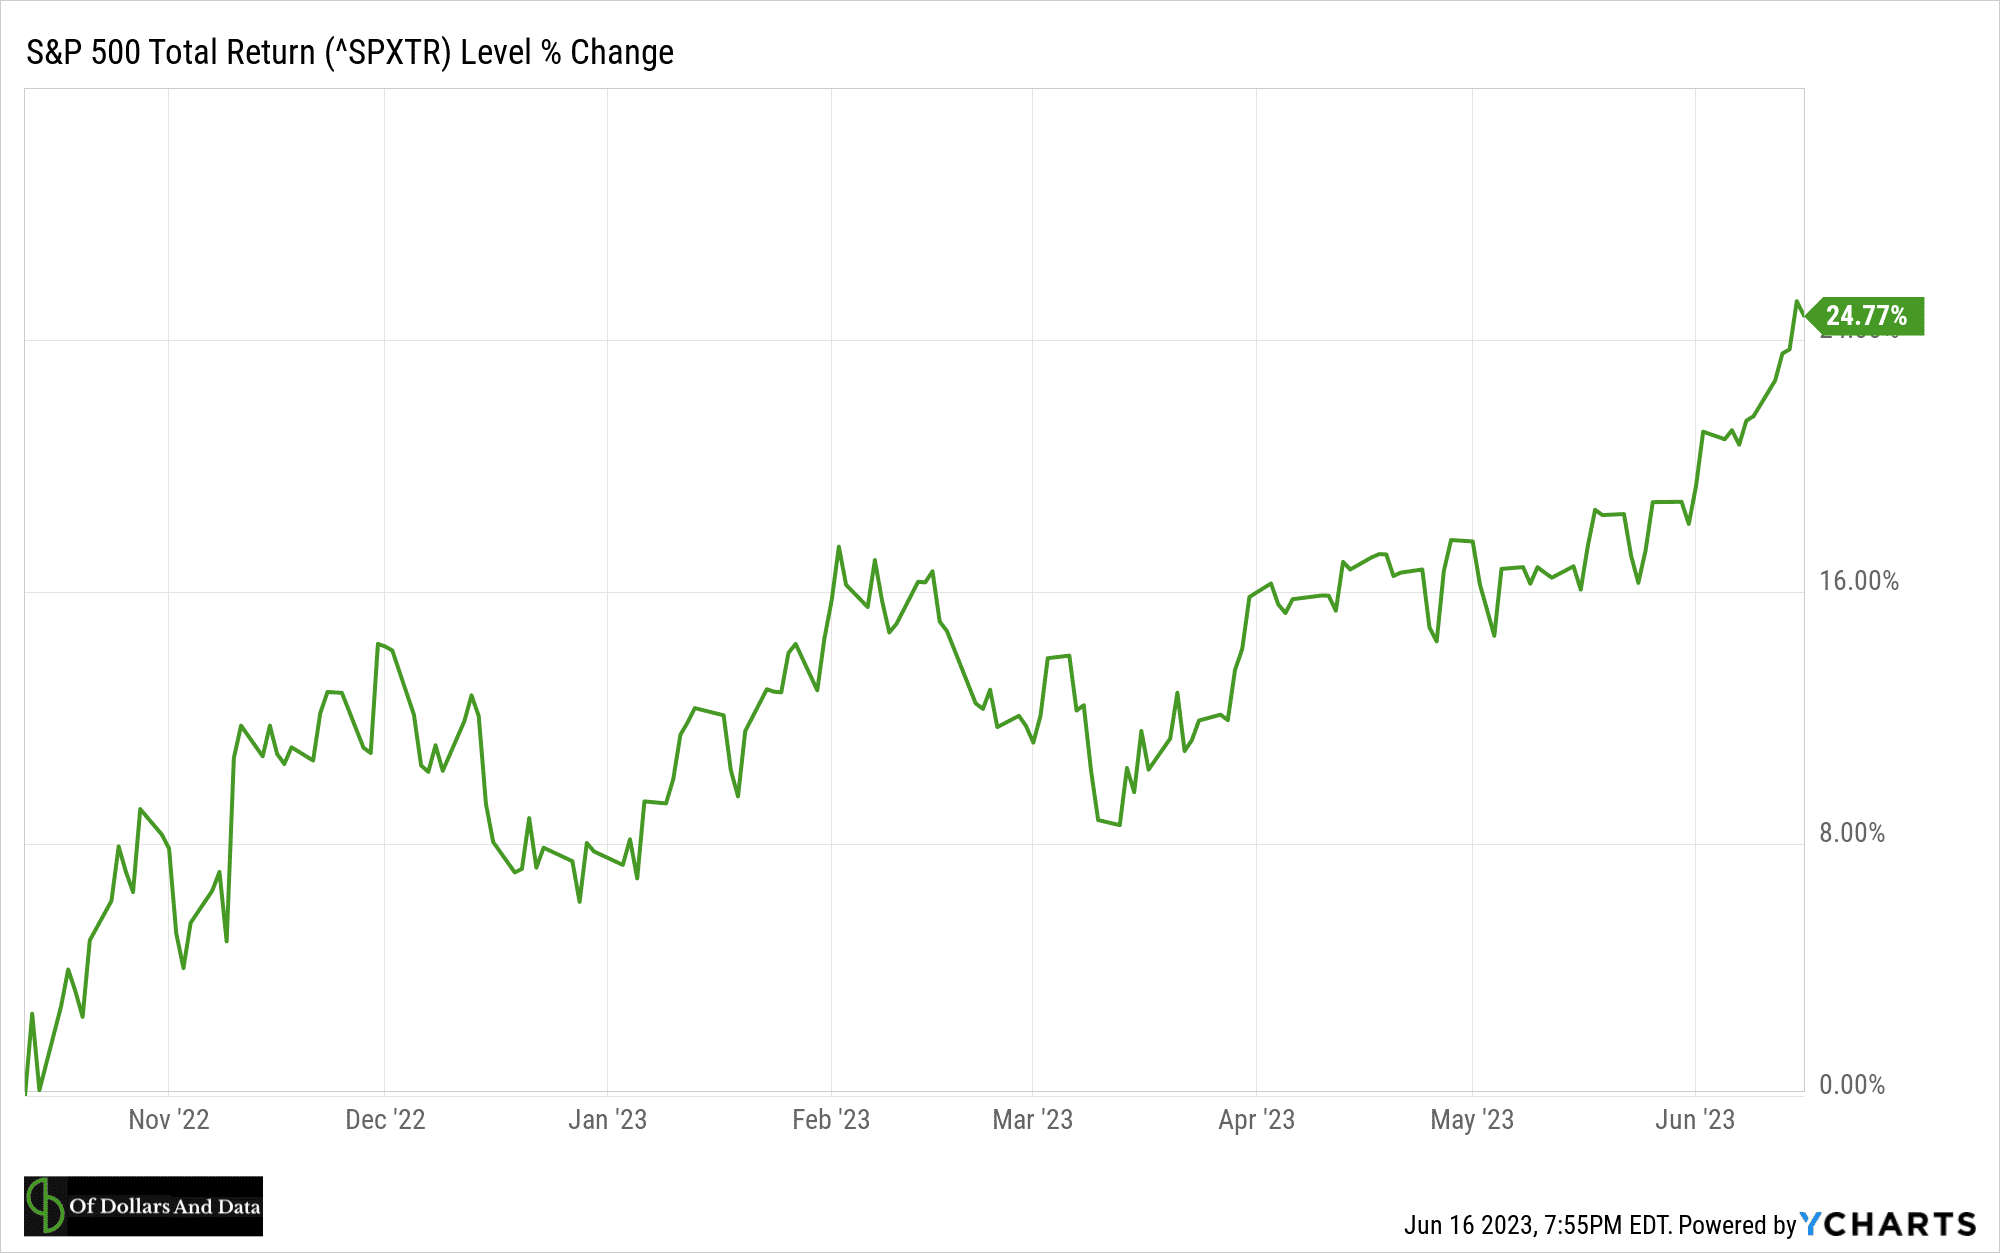 Chart of the S&P 500 Total Return from October 2022 to June 2023.